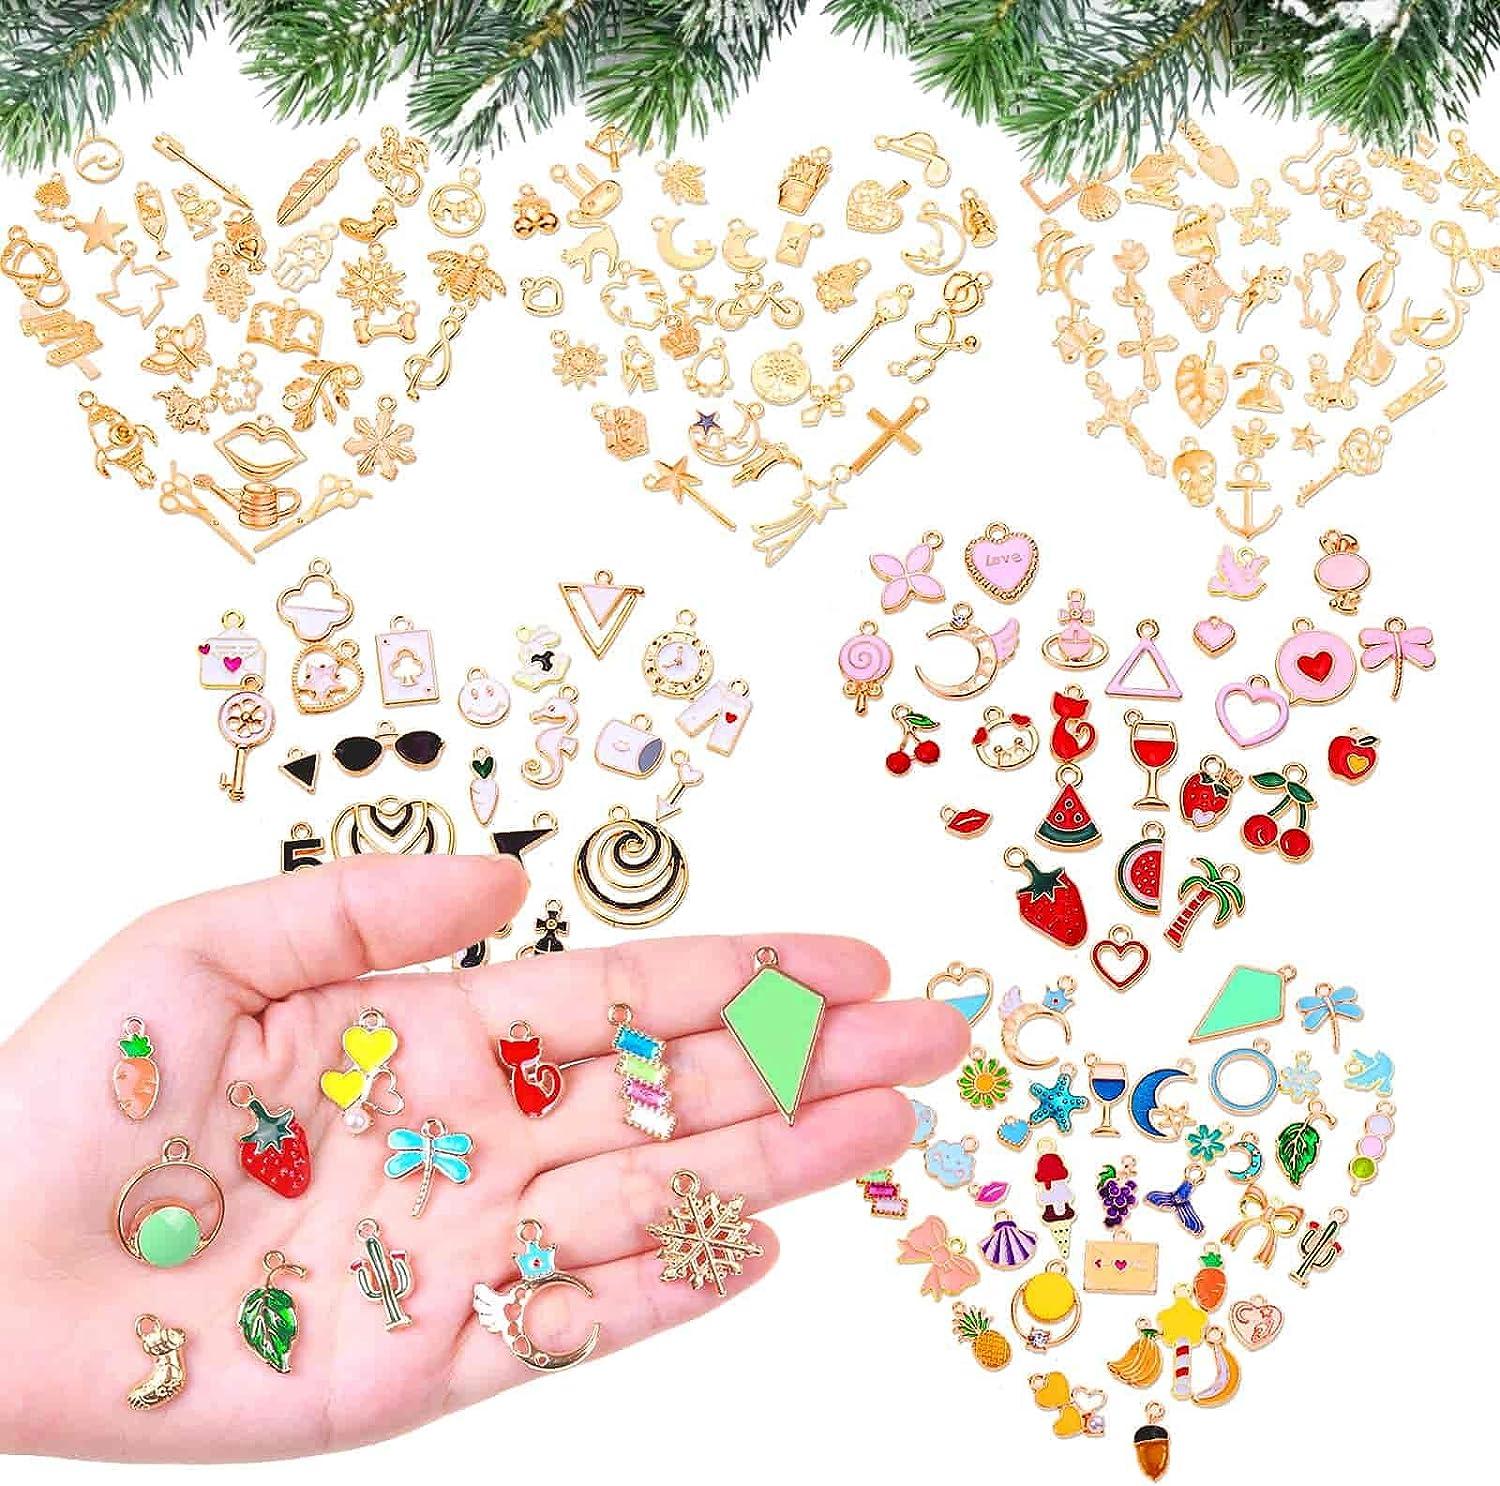 200pcs Charms for Jewelry Making, Assorted Jewelry Bangle Charms, Wholesale Mixed Bulk Metal Earring Charms for DIY Necklace Bracelet Jewelry Making